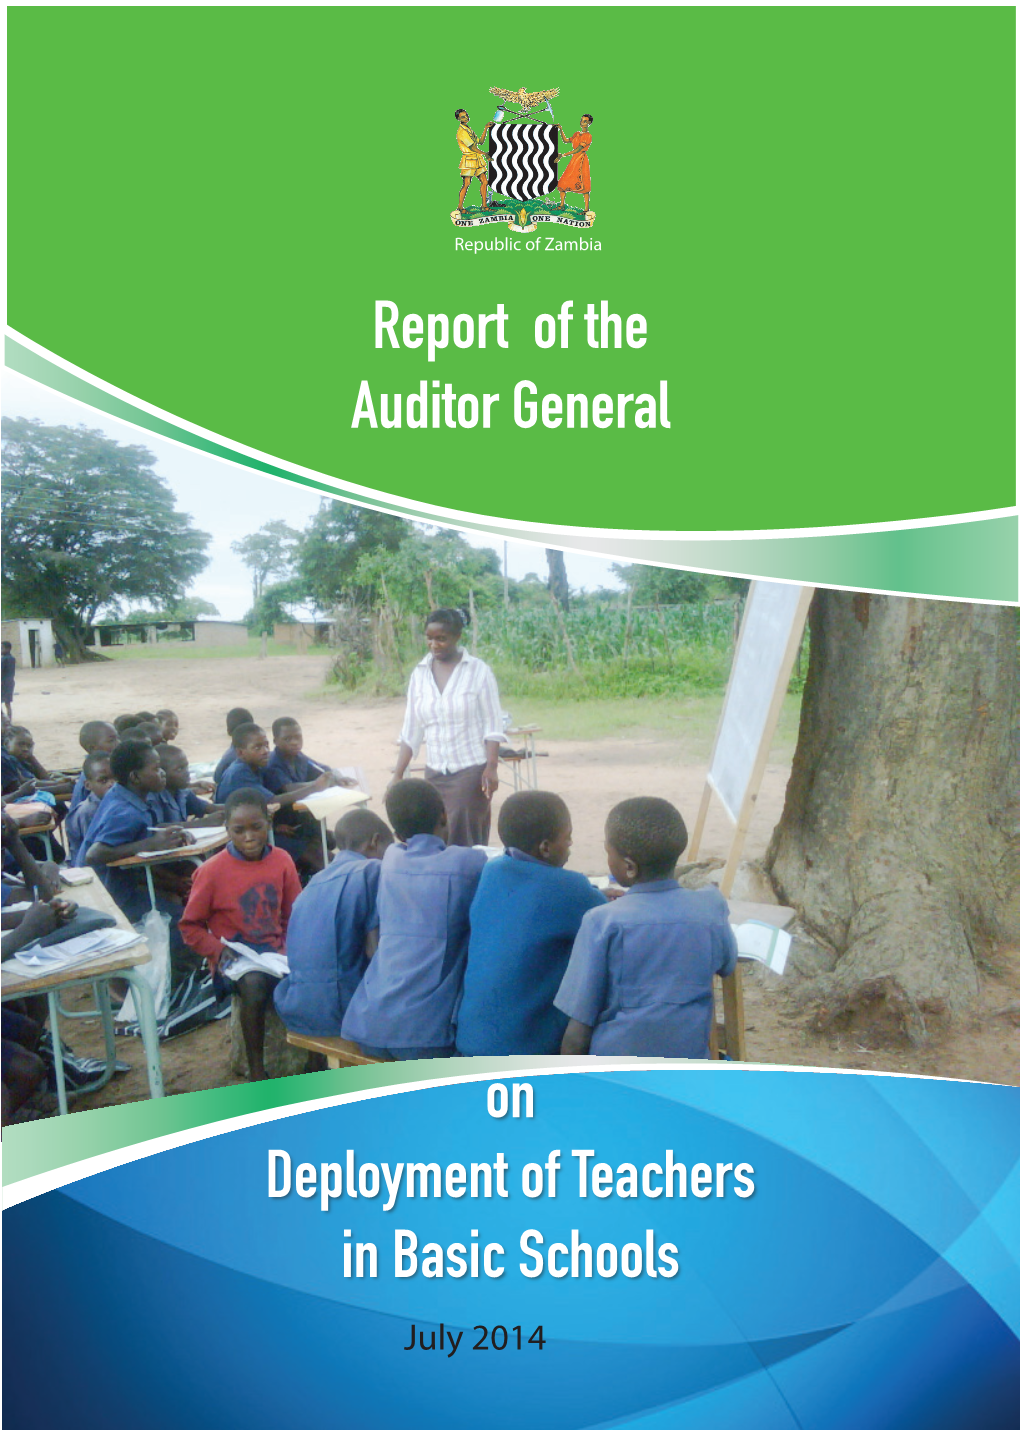 Report of the Auditor General on Deployment of Teachers in Basic